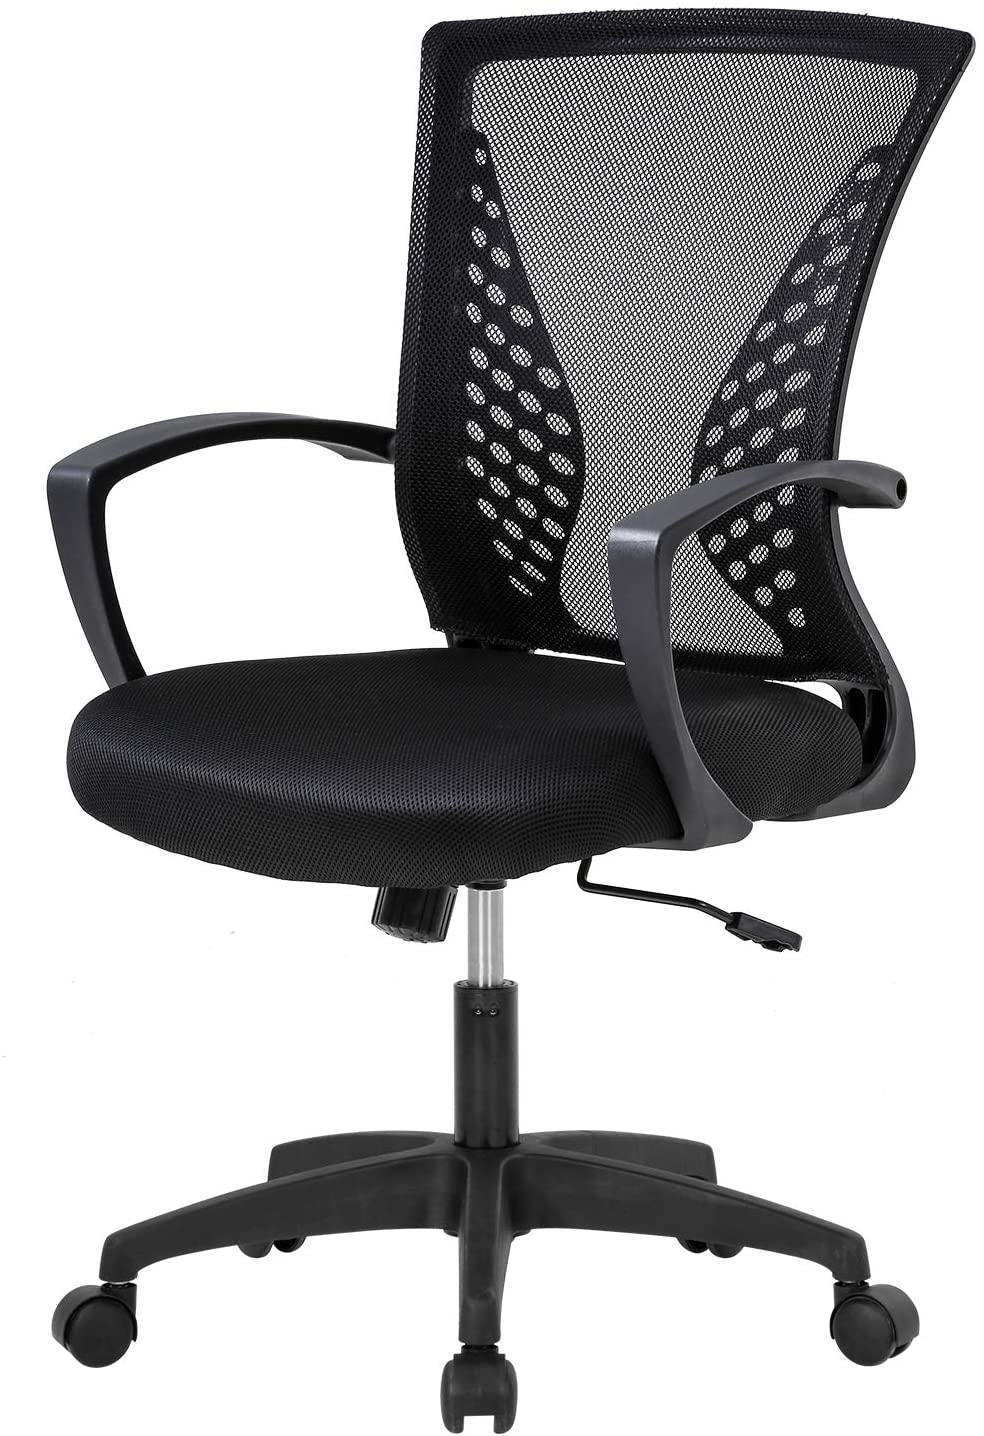 Home Office Chair Work Desk Chair Comfort Ergonomic Swivel Computer Chair,  Breathable Mesh Desk Chair, Lumbar Support Task Chair,Adjustable  Height,White 